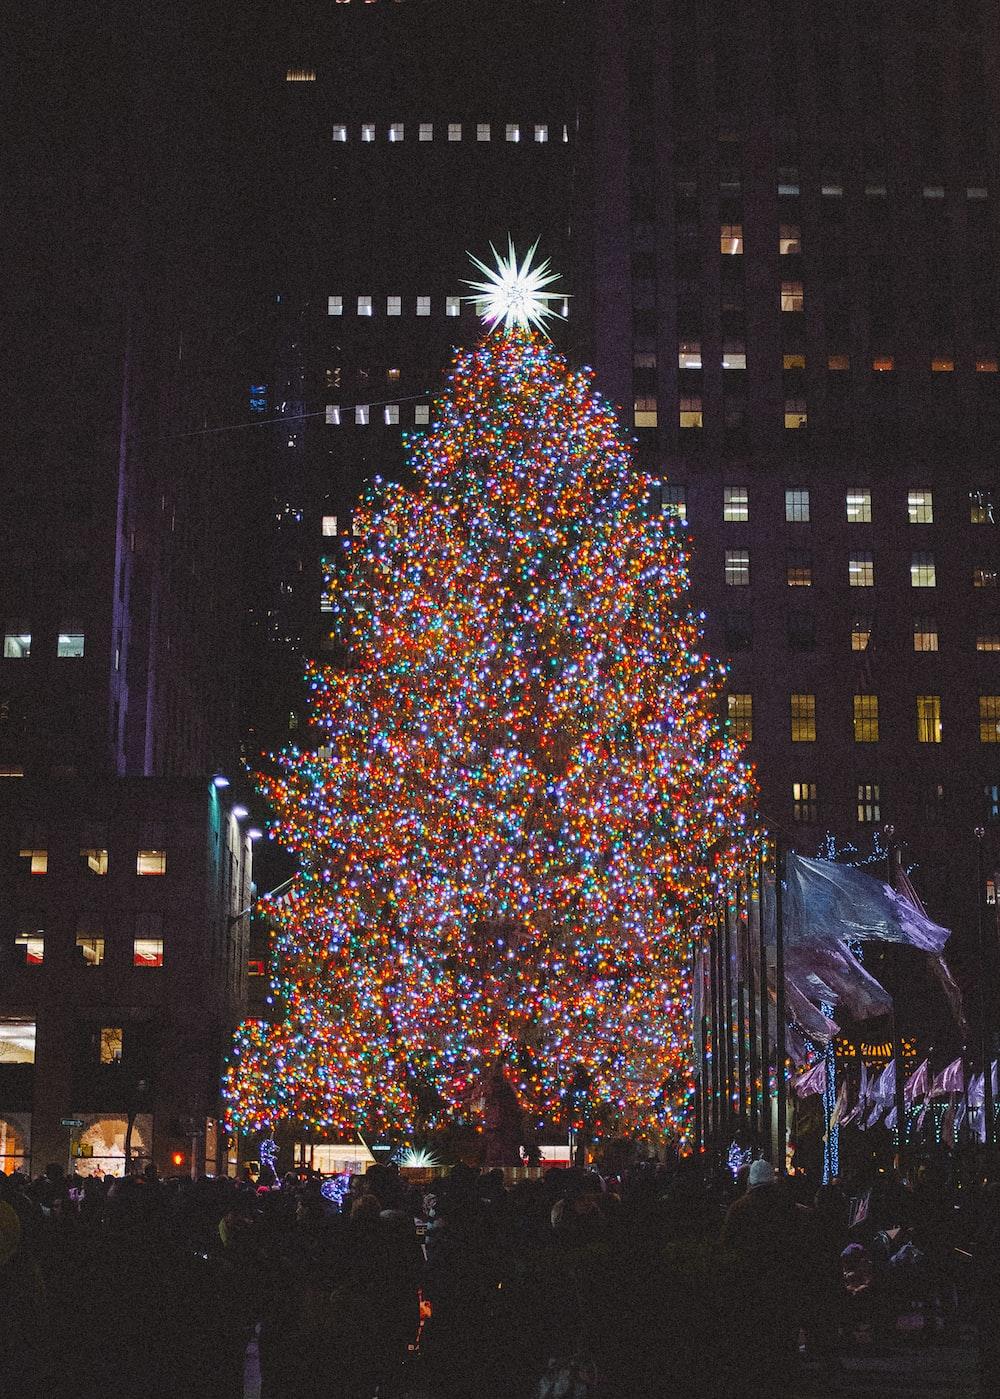  New York Christmas Pictures Download Free Images on